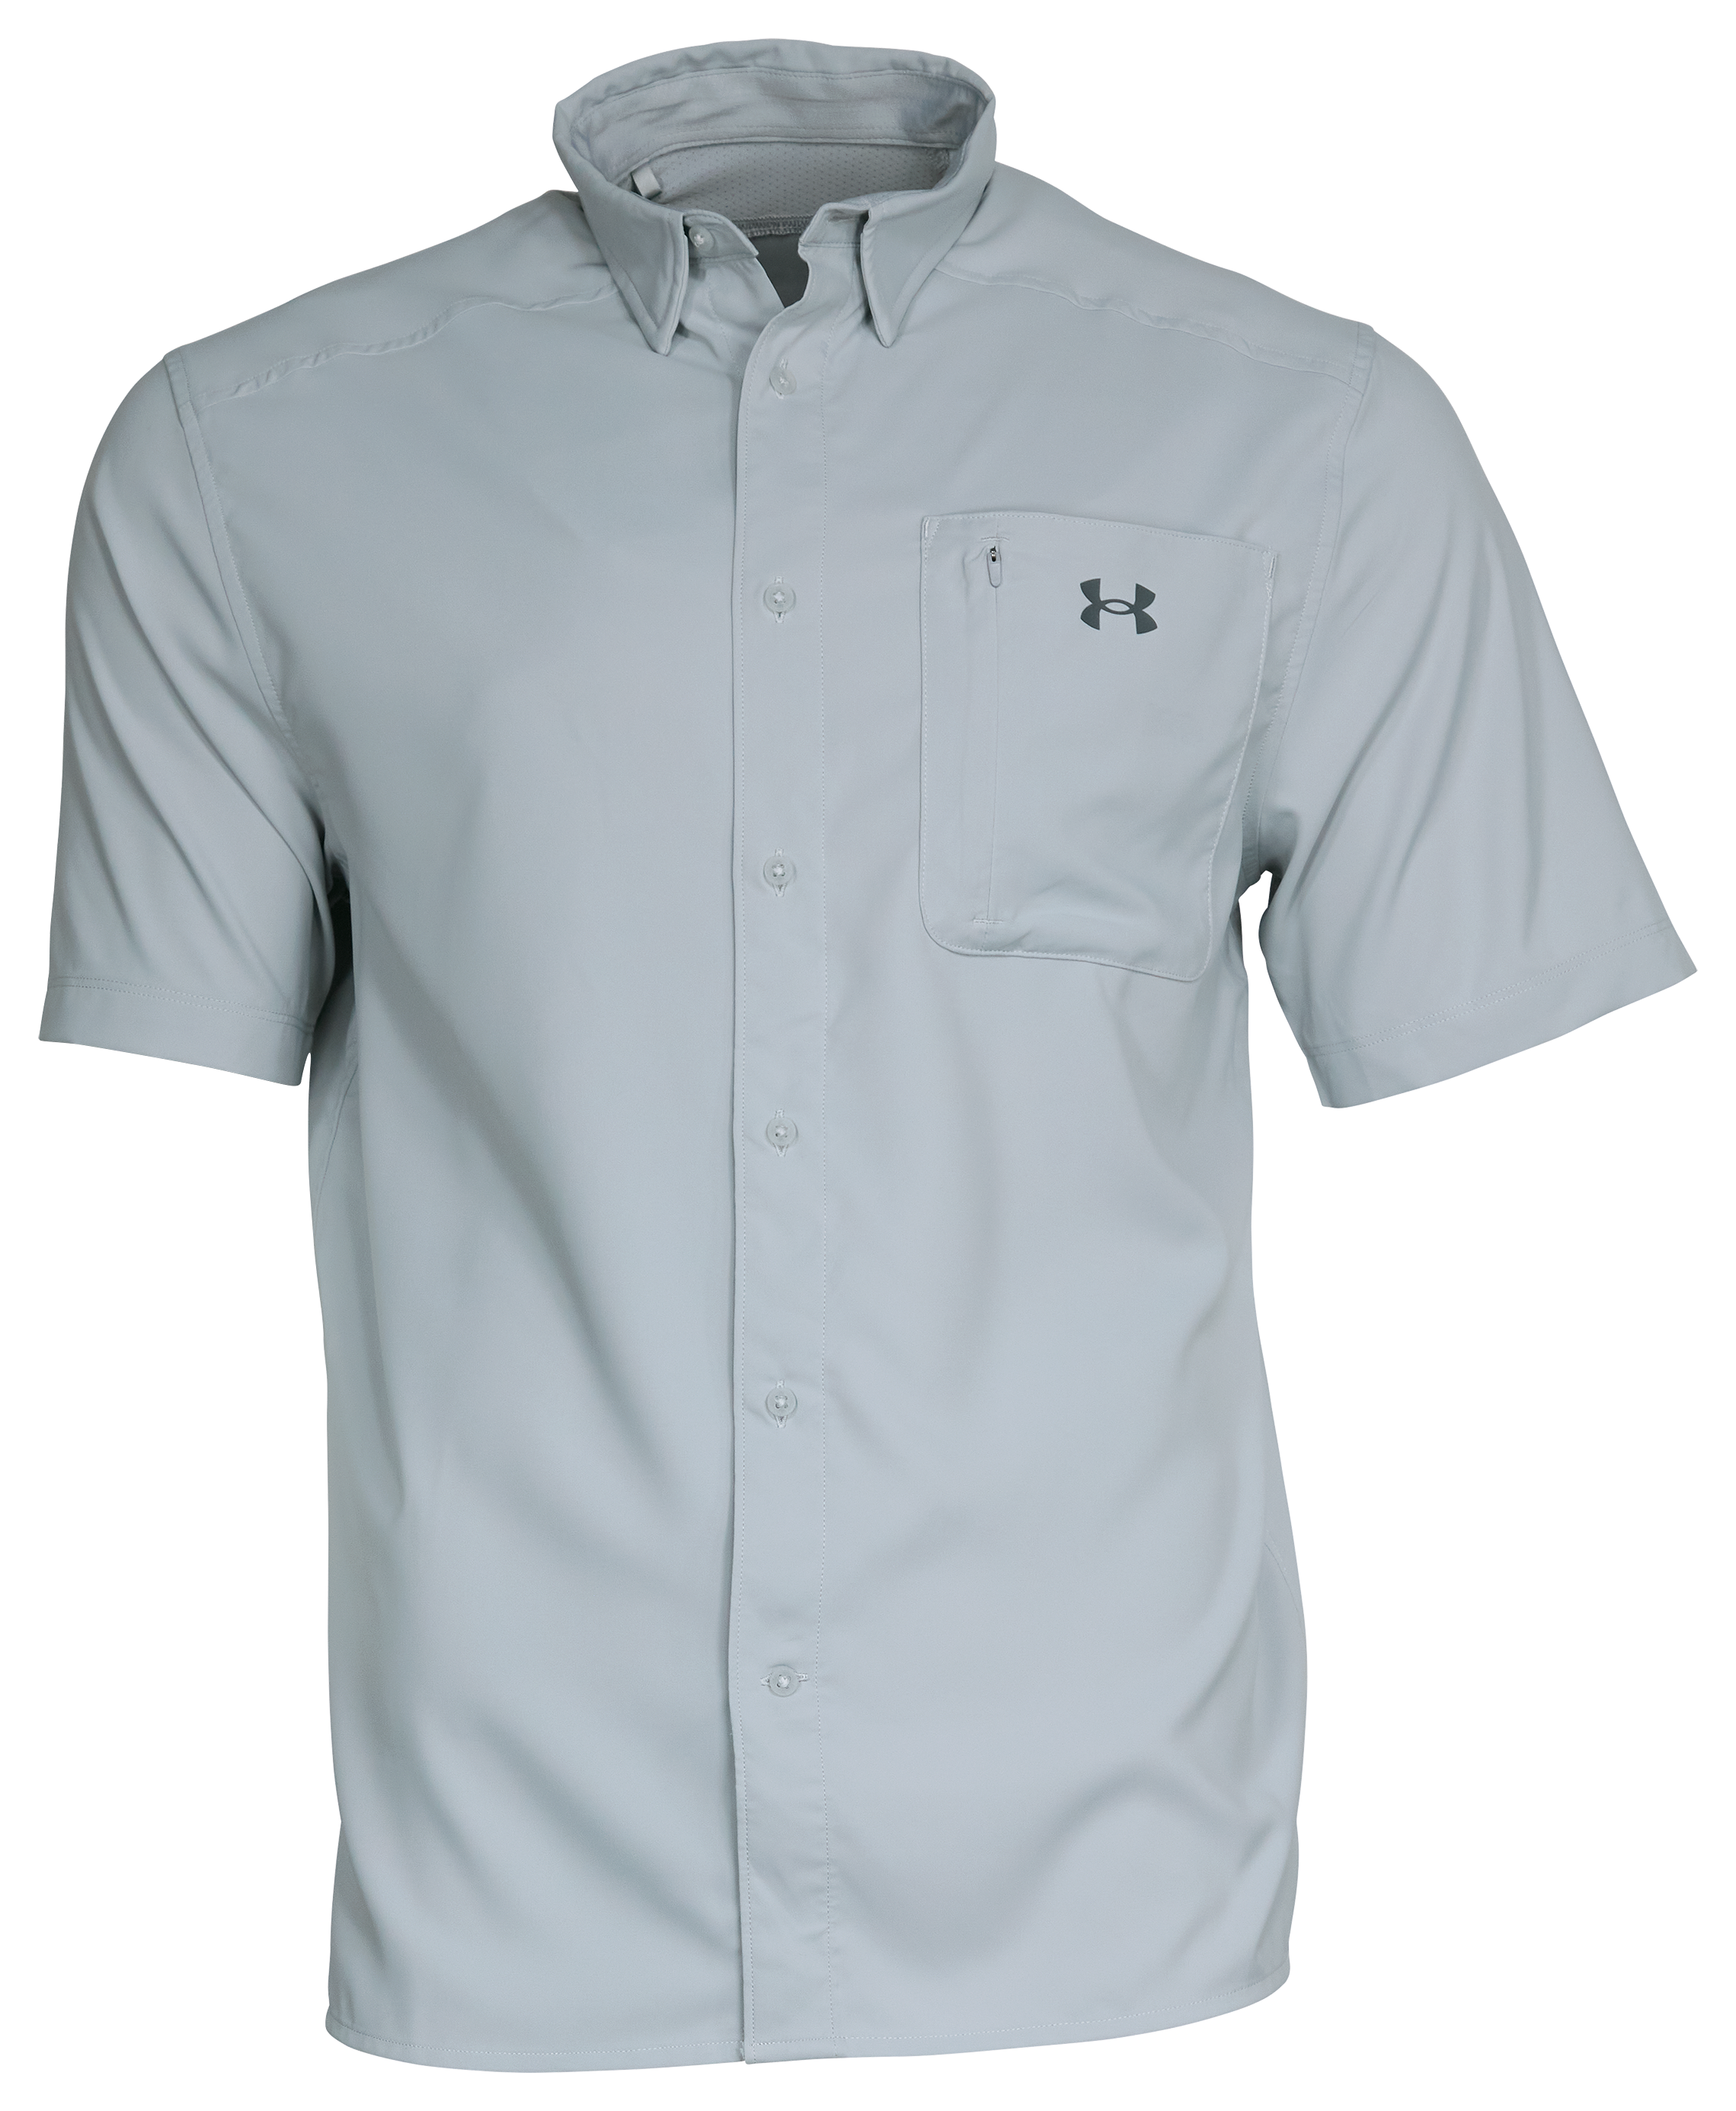 Under Armour Quick Dry Button-front Shirts for Men